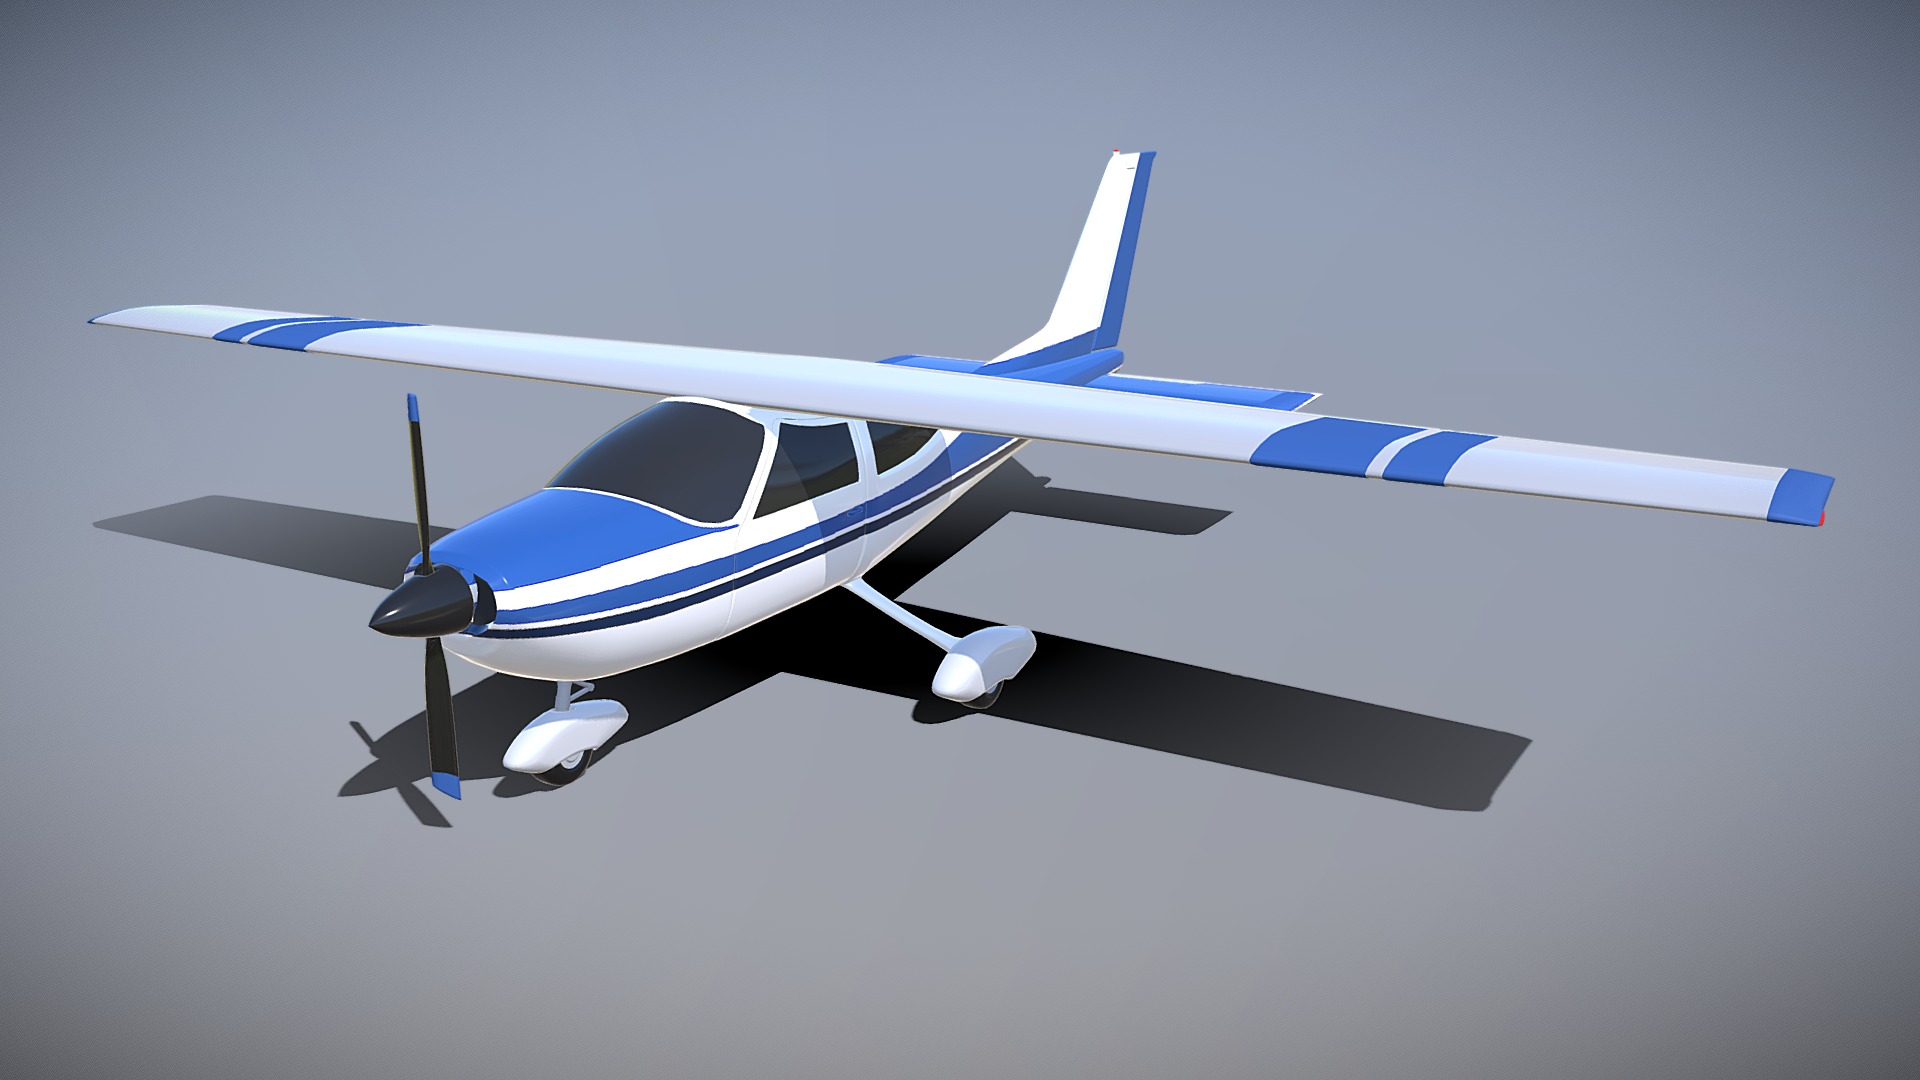 3D model Cessna Cardinal propeller plane - This is a 3D model of the Cessna Cardinal propeller plane. The 3D model is about a small airplane flying in the sky.